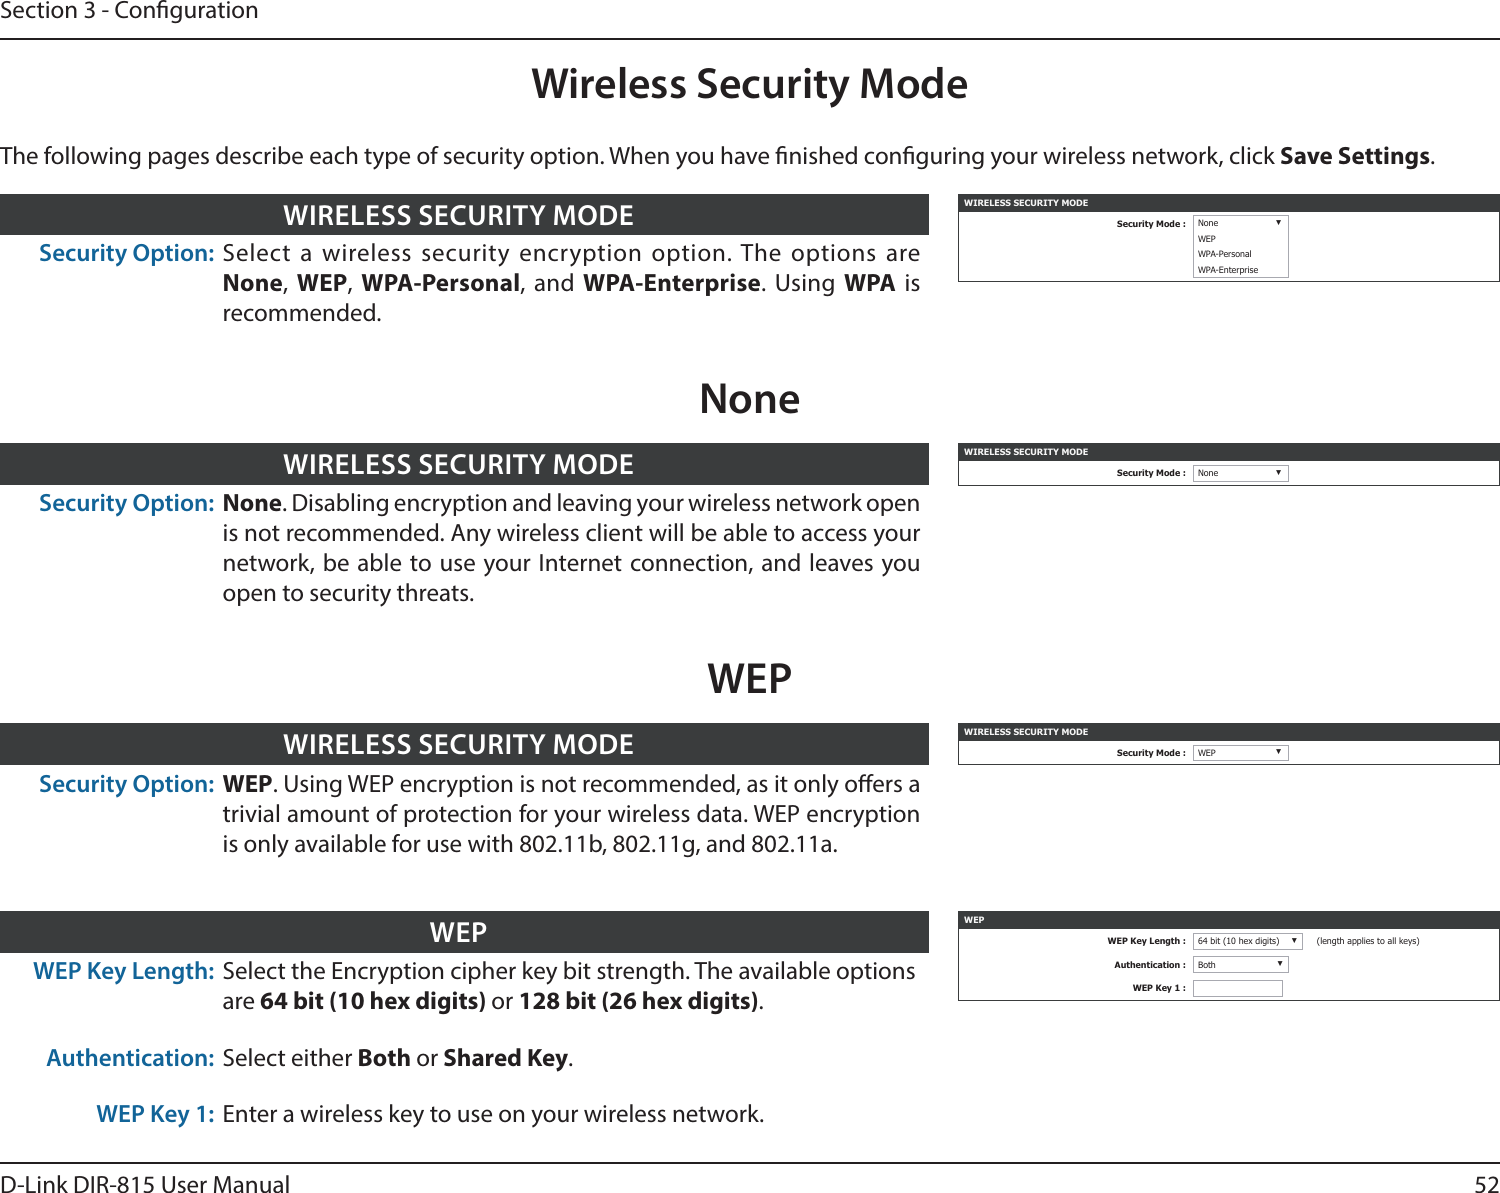 52D-Link DIR-815 User ManualSection 3 - CongurationWireless Security ModeWIRELESS SECURITY MODESecurity Mode : None ▼WEPWPA-PersonalWPA-EnterpriseSecurity Option: Select a wireless security encryption option. The options are None, WEP,  WPA-Personal, and WPA-Enterprise. Using WPA is recommended. WIRELESS SECURITY MODEWIRELESS SECURITY MODESecurity Mode : None ▼Security Option: None. Disabling encryption and leaving your wireless network open is not recommended. Any wireless client will be able to access your network, be able to use your Internet connection, and leaves you open to security threats.WIRELESS SECURITY MODENoneThe following pages describe each type of security option. When you have nished conguring your wireless network, click Save Settings.WIRELESS SECURITY MODESecurity Mode : WEP ▼Security Option: WEP. Using WEP encryption is not recommended, as it only oers a trivial amount of protection for your wireless data. WEP encryption is only available for use with 802.11b, 802.11g, and 802.11a.WIRELESS SECURITY MODEWEPWEP Key Length: Select the Encryption cipher key bit strength. The available optionsare 64 bit (10 hex digits) or 128 bit (26 hex digits).Authentication: Select either Both or Shared Key.WEP Key 1: Enter a wireless key to use on your wireless network.WEP WEPWEP Key Length : 64 bit (10 hex digits) ▼(length applies to all keys)Authentication : Both ▼WEP Key 1 :